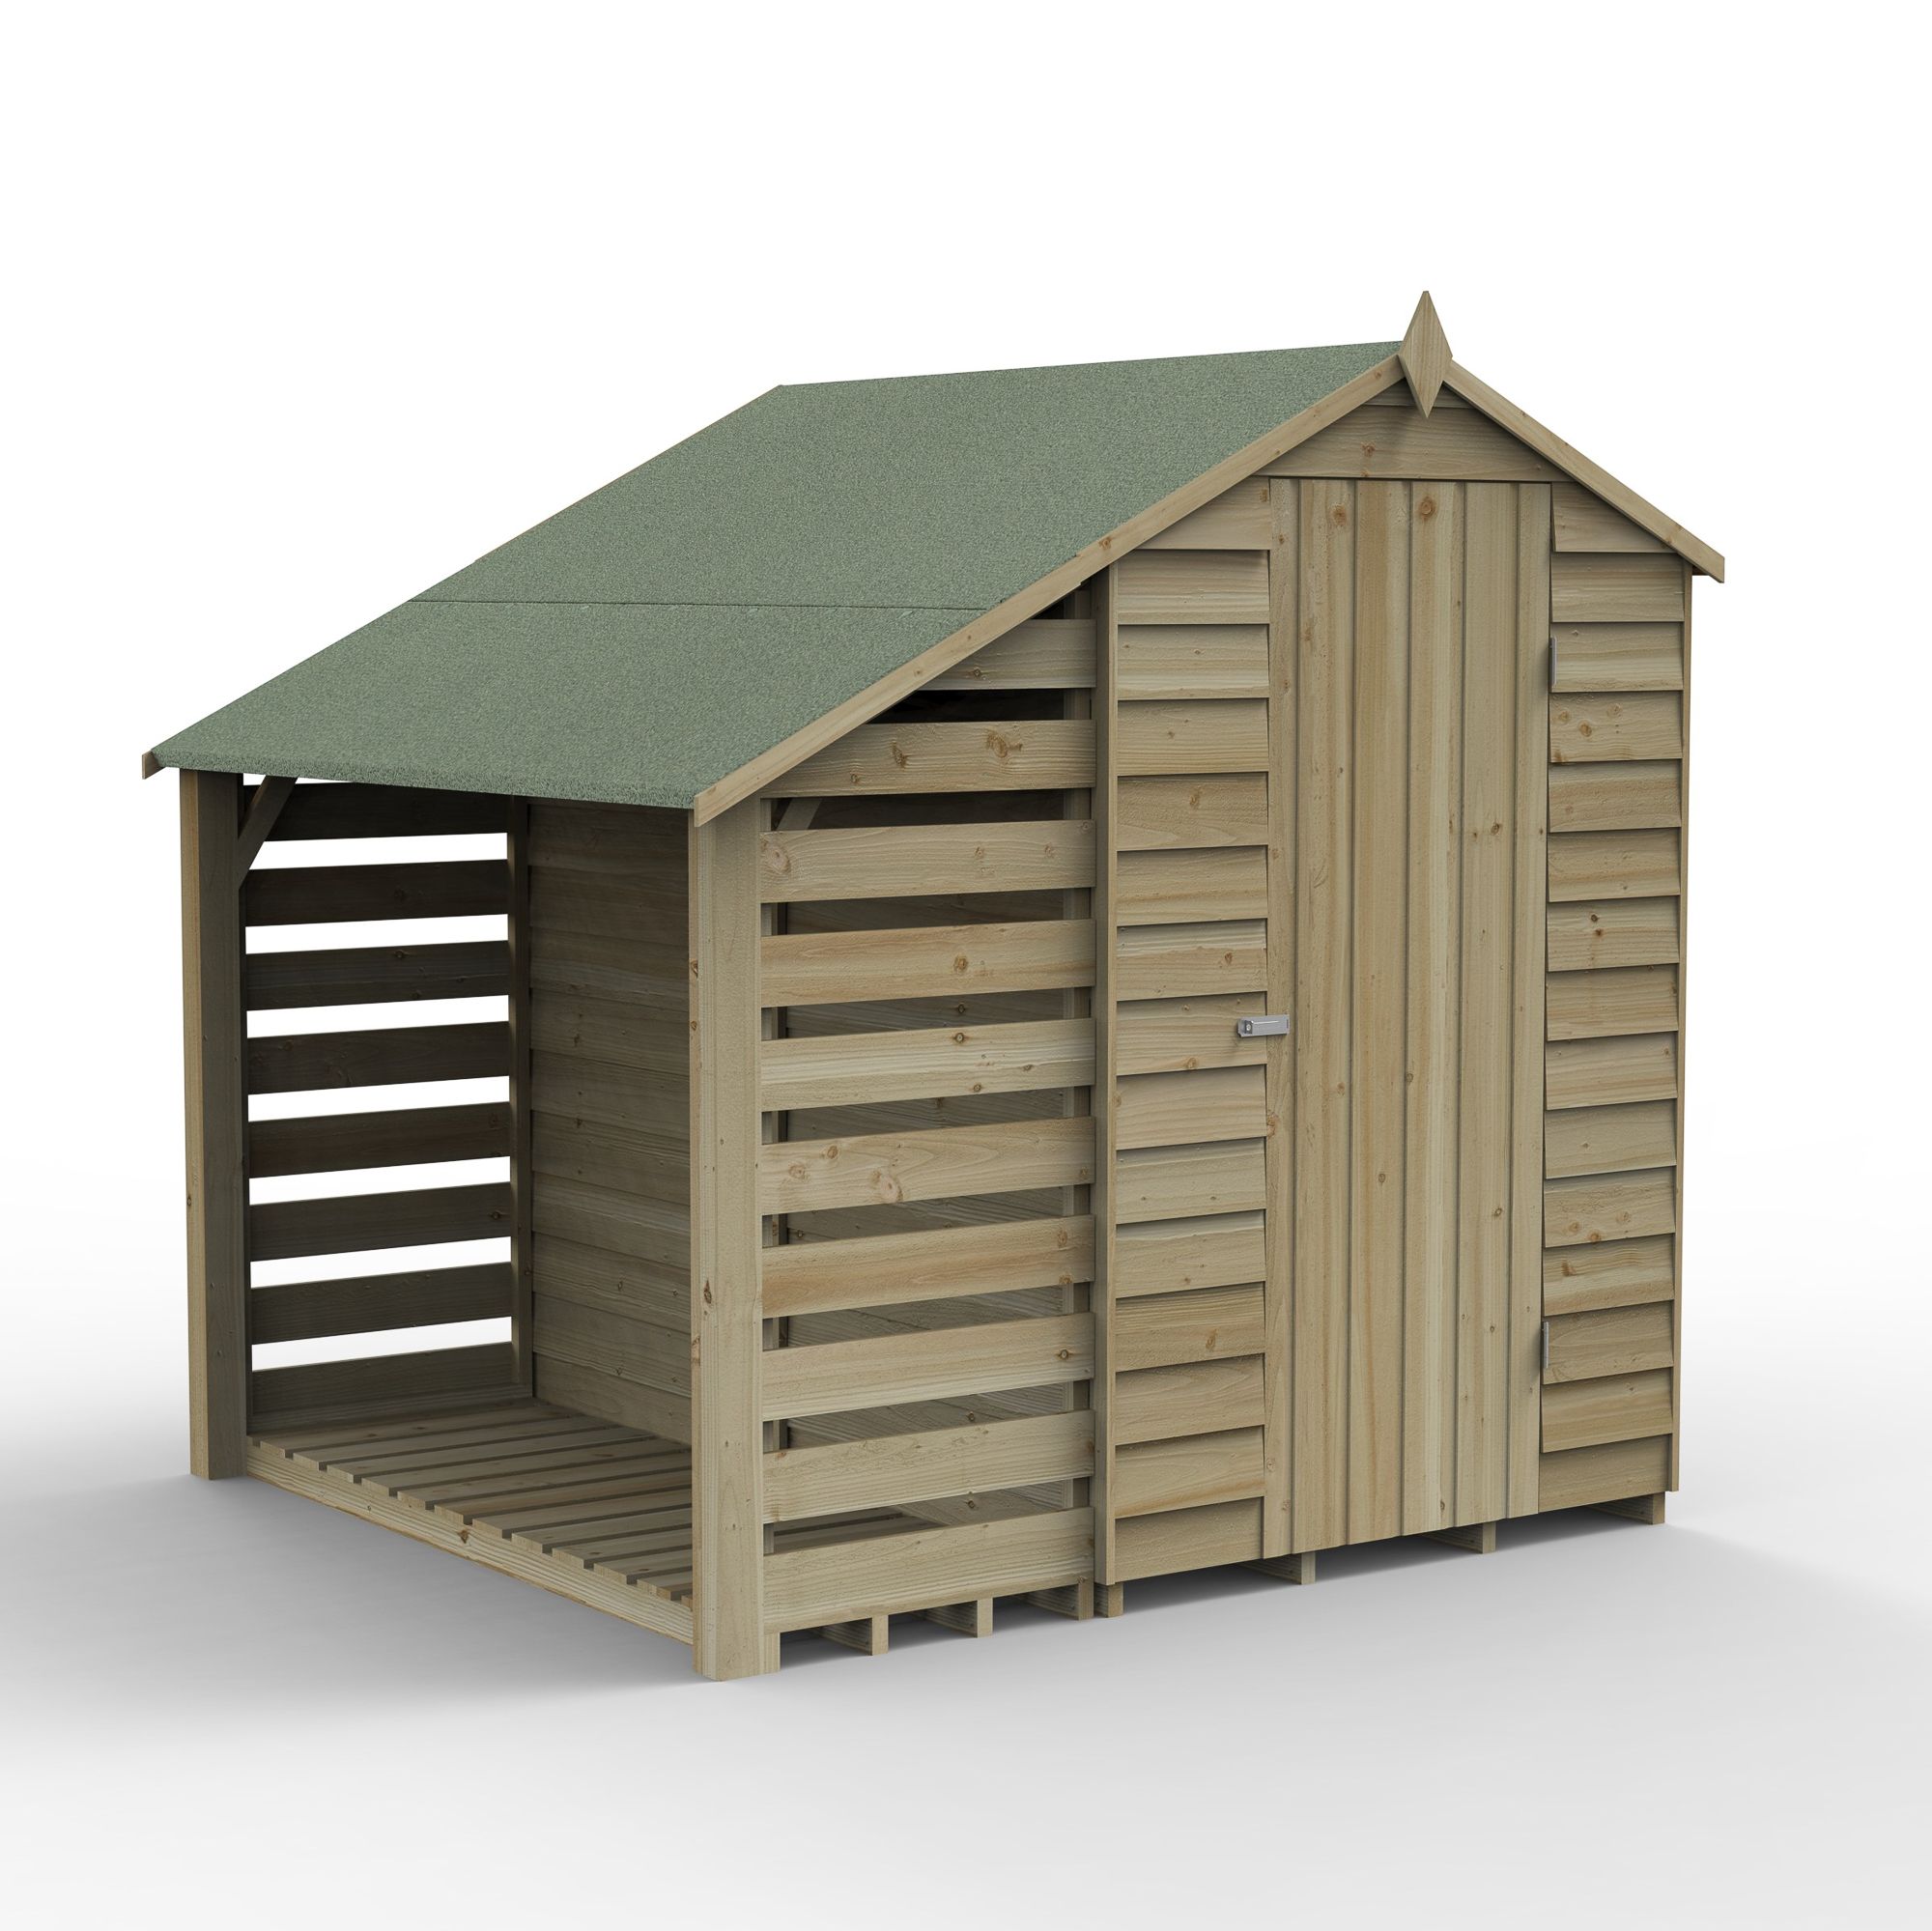 Forest Garden Shed Overlap 8x6 ft Apex Wooden Pressure treated Shed with floor